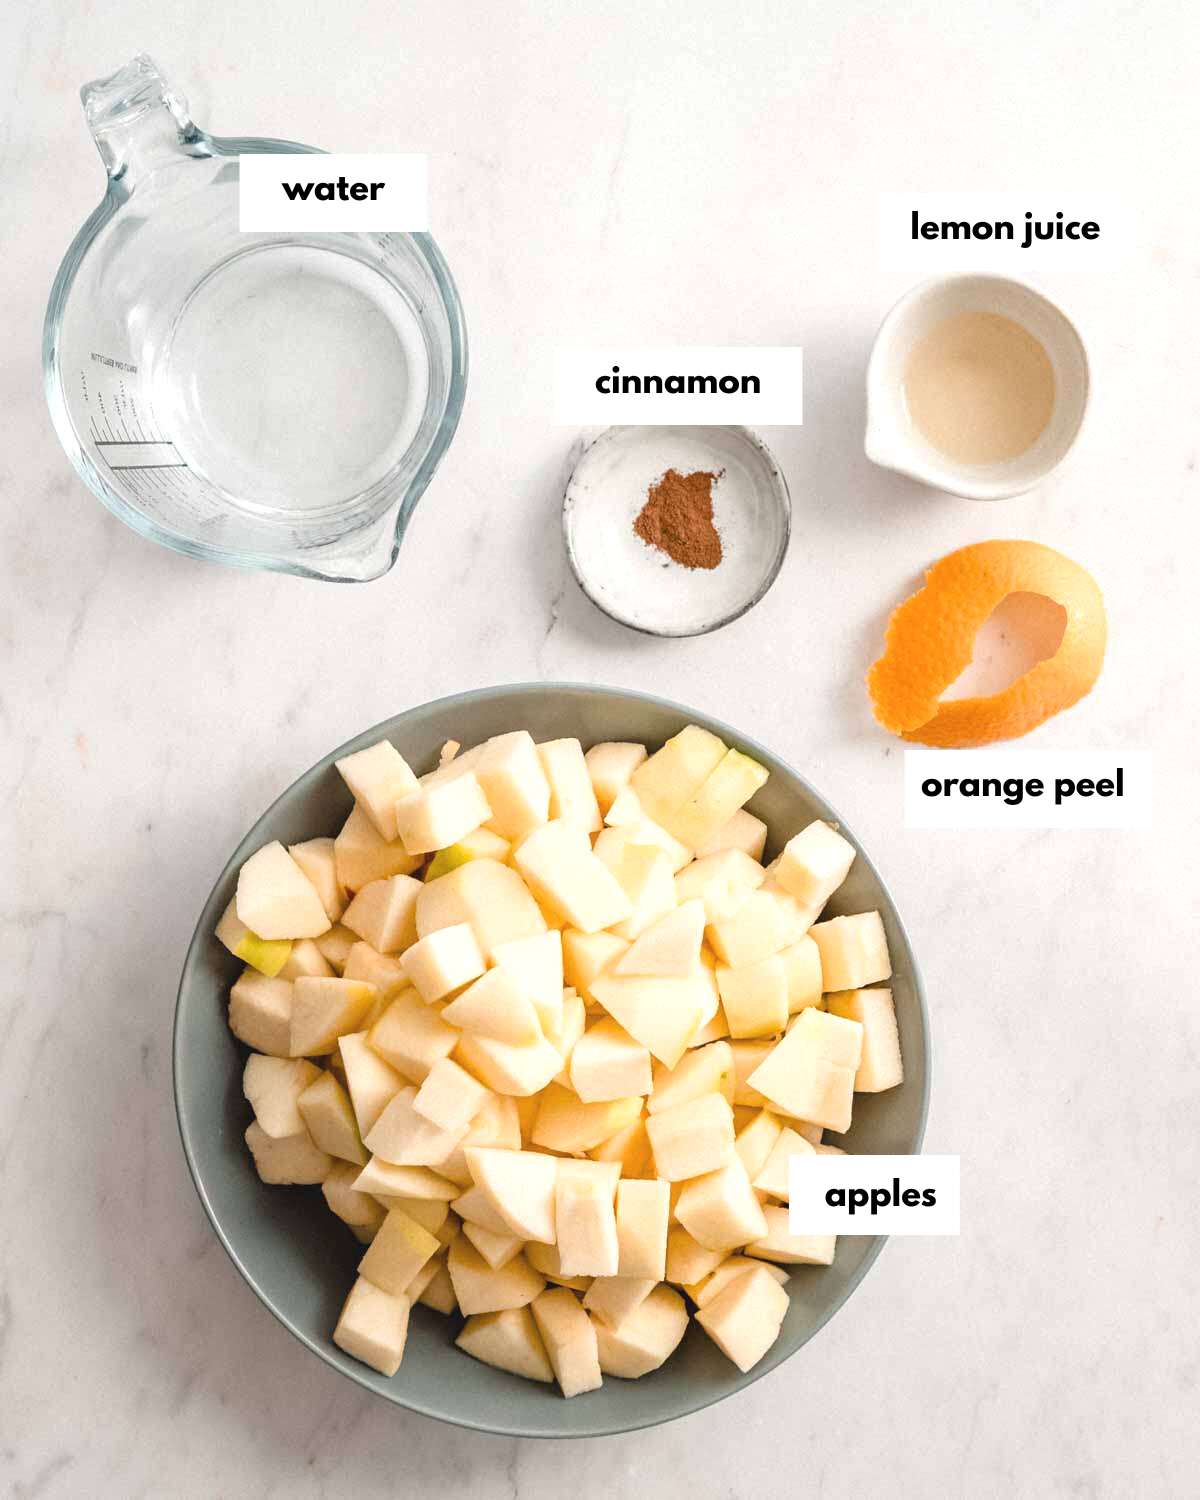 All ingredients needed to make this applesauce recipe.